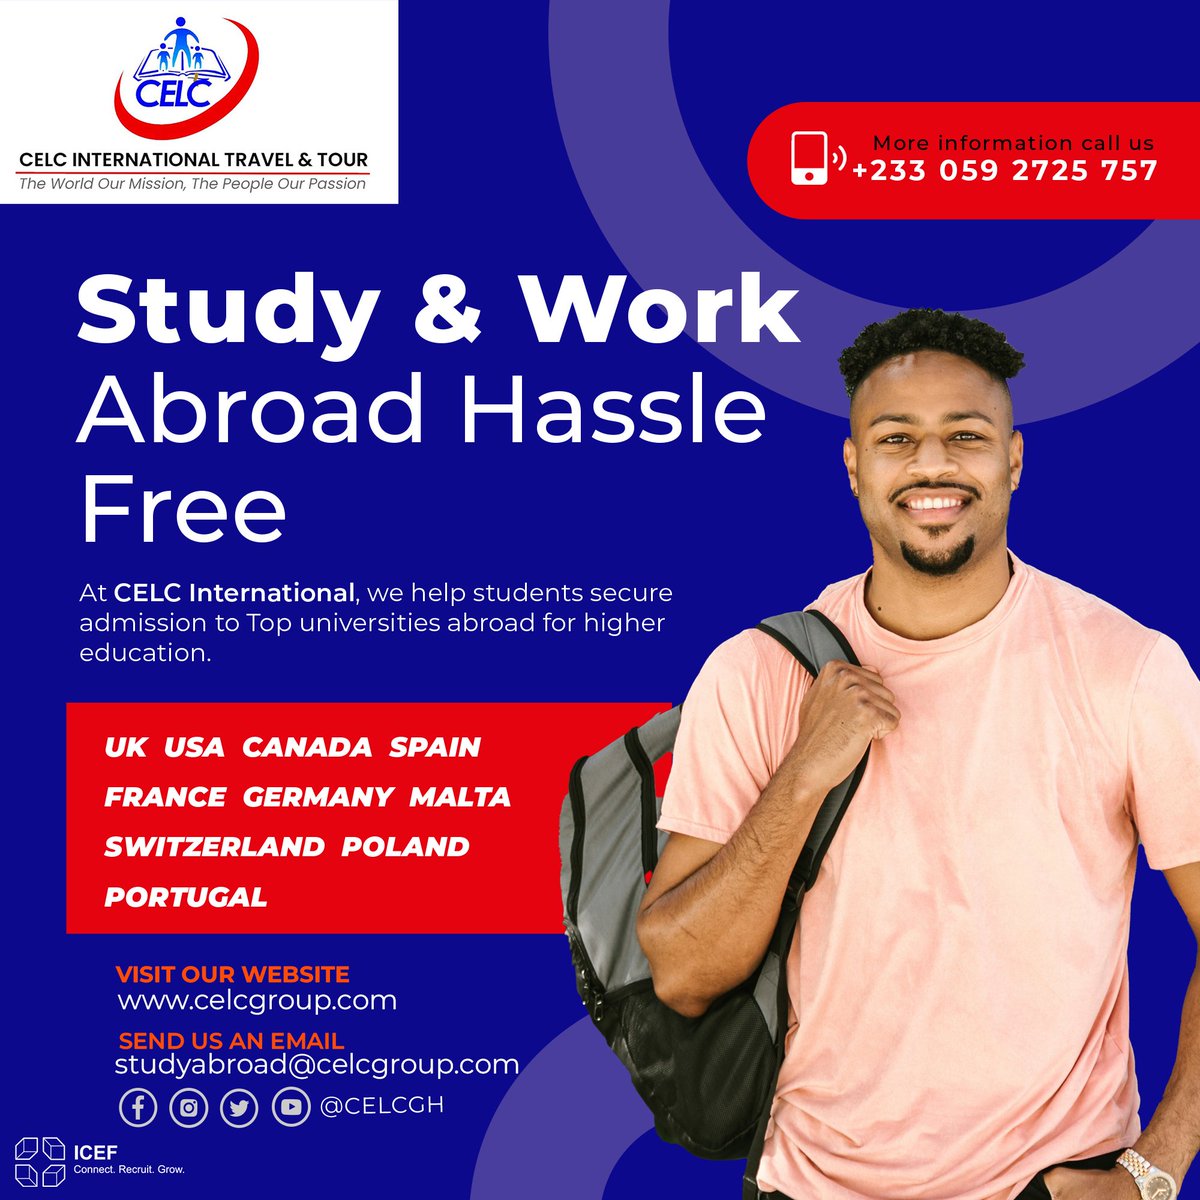 EXPAND YOUR HORIZONS: STUDY AND WORK ABROAD FOR A WORLD 🌎 OF OPPORTUNITIES 

CONTAC US AND GET STARTED
📞
020 382 1113
059 272 5757

#celctravels_int #travelagency #studyabroadconsultants #studytours #studyabroad #studyandworkabroad #studyandwork #traveling #tourism